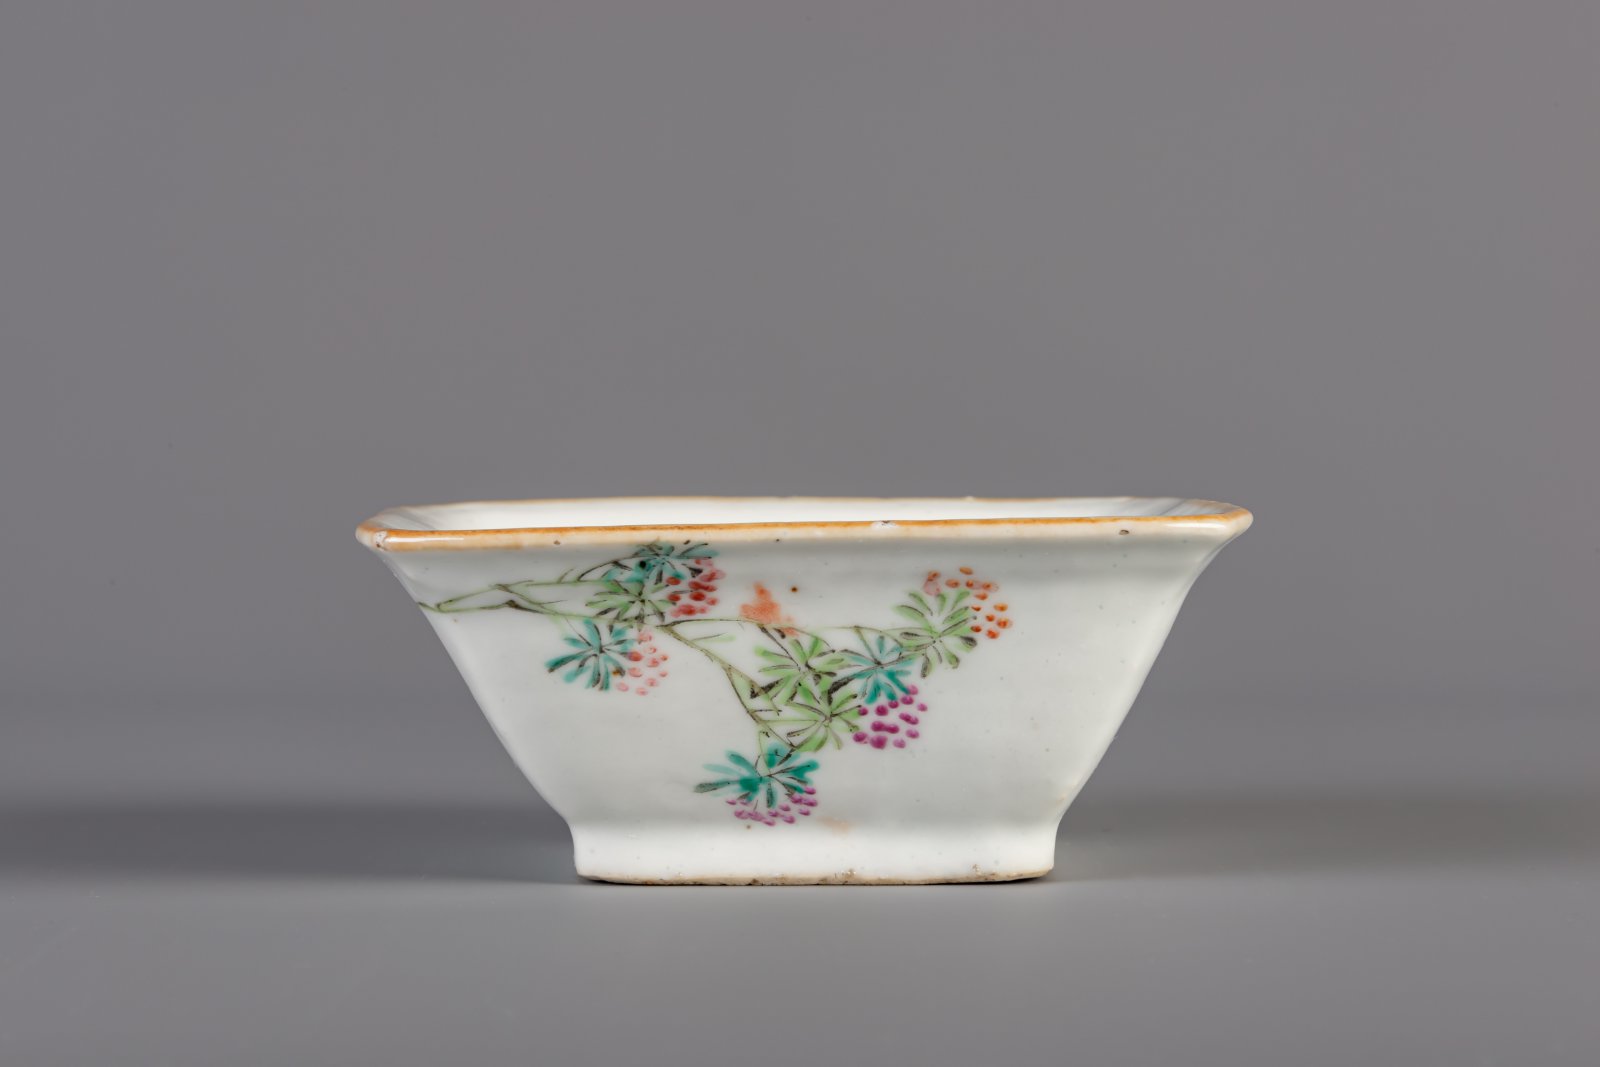 A Chinese famille rose sweetmeat or rice table set with birds among flowers, 19th C. - Image 8 of 11